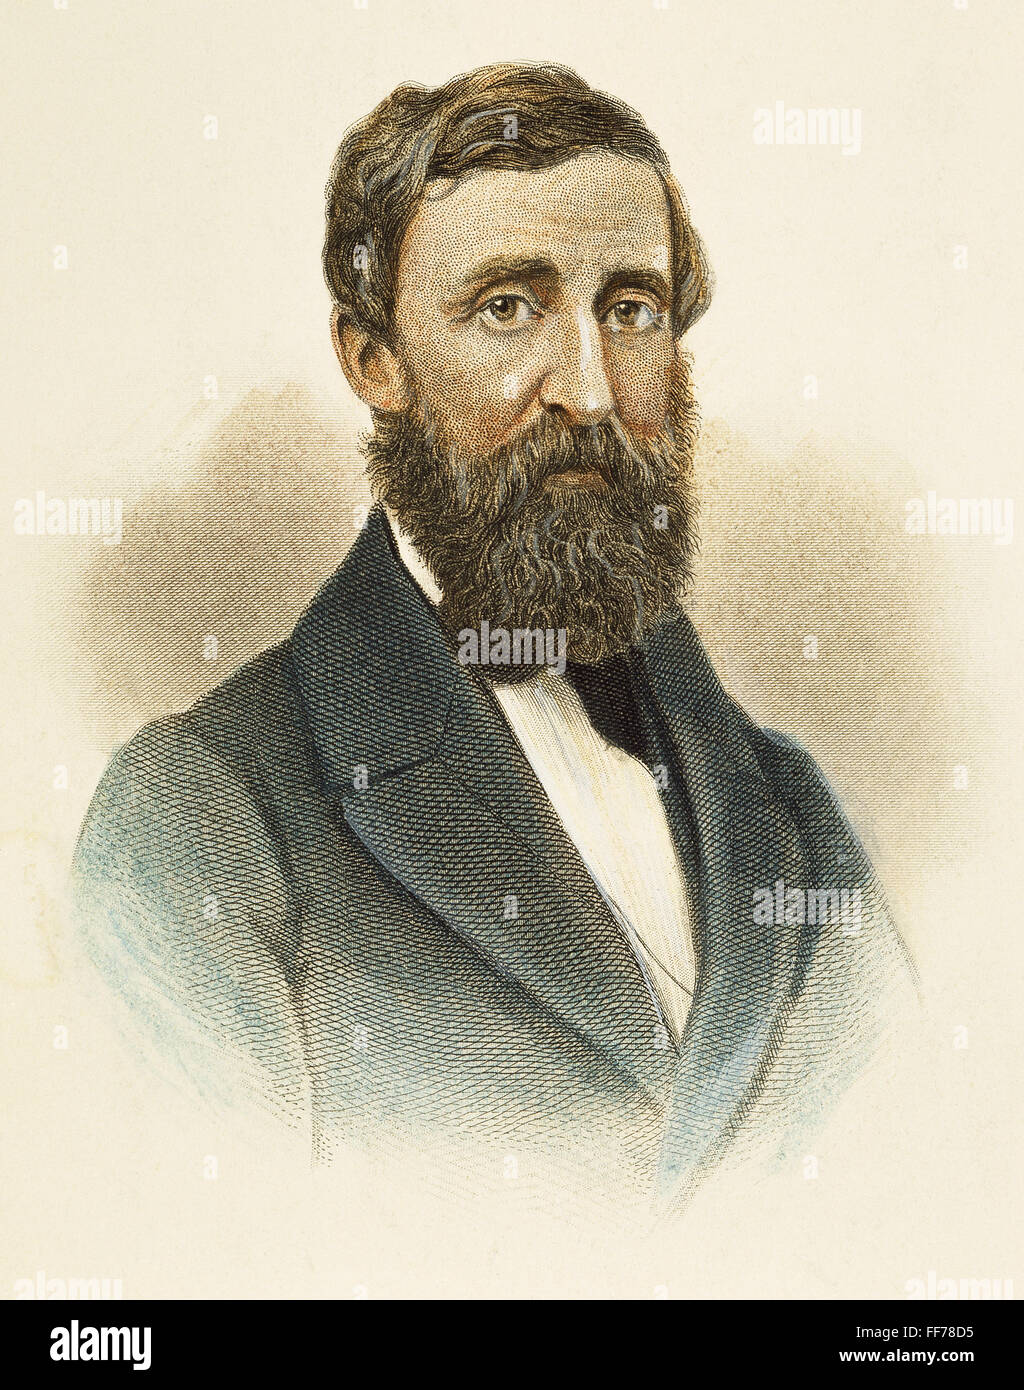 HENRY DAVID THOREAU. /n(1817-1862). American writer. Color engraving after a photograph taken in 1861. Stock Photo